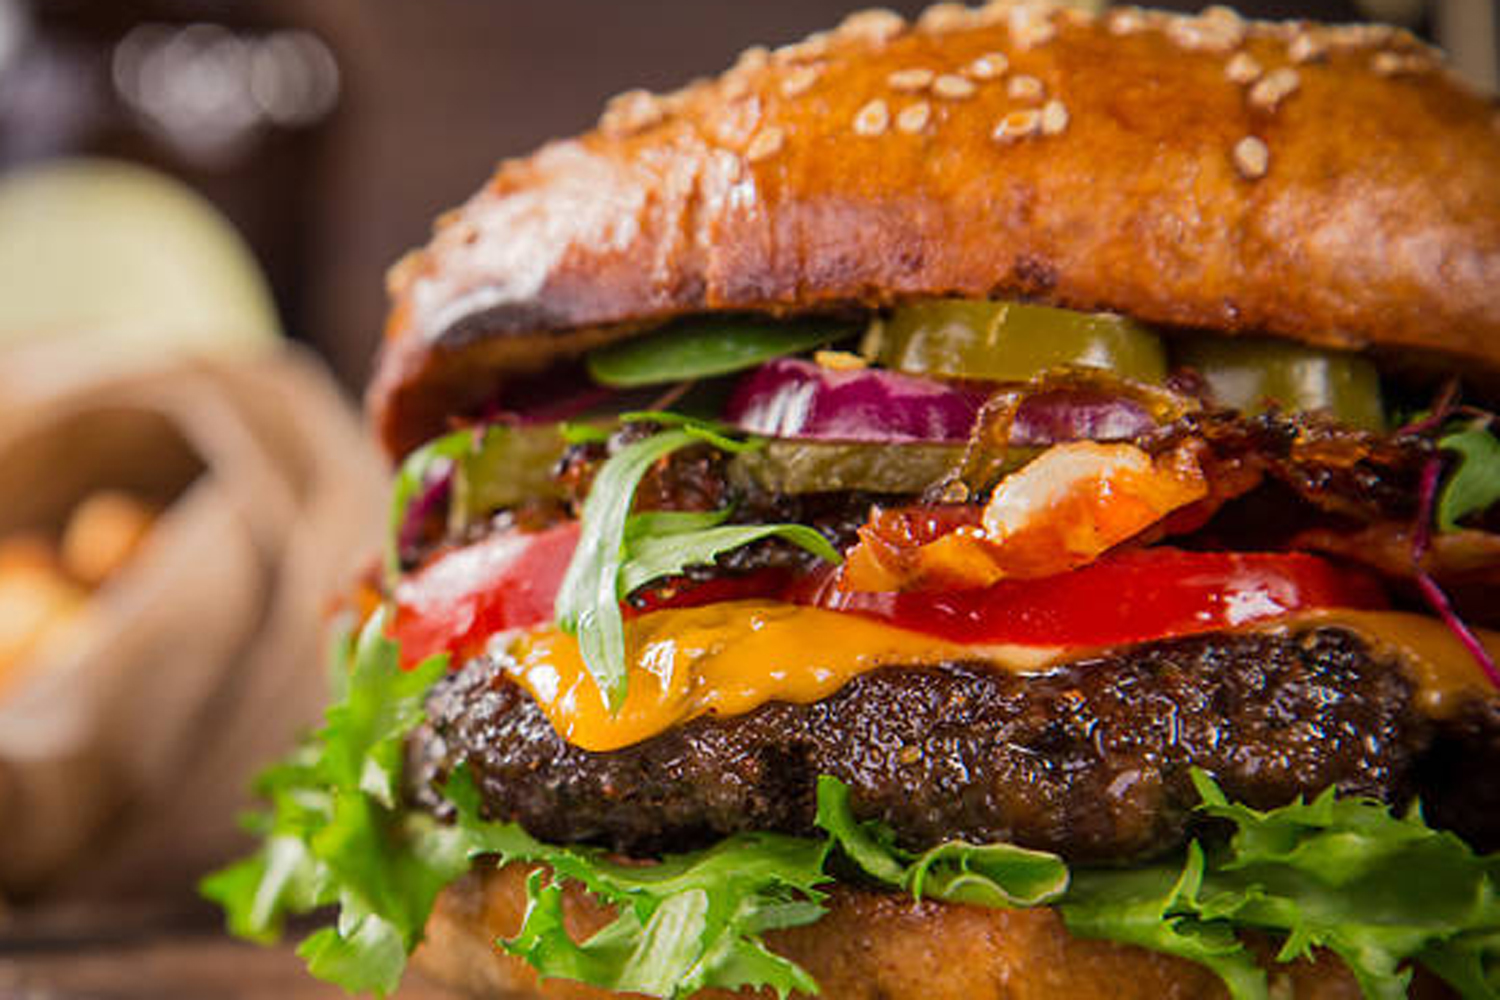 10 secrets to the perfect burger, according to chefs | Restaurants ...